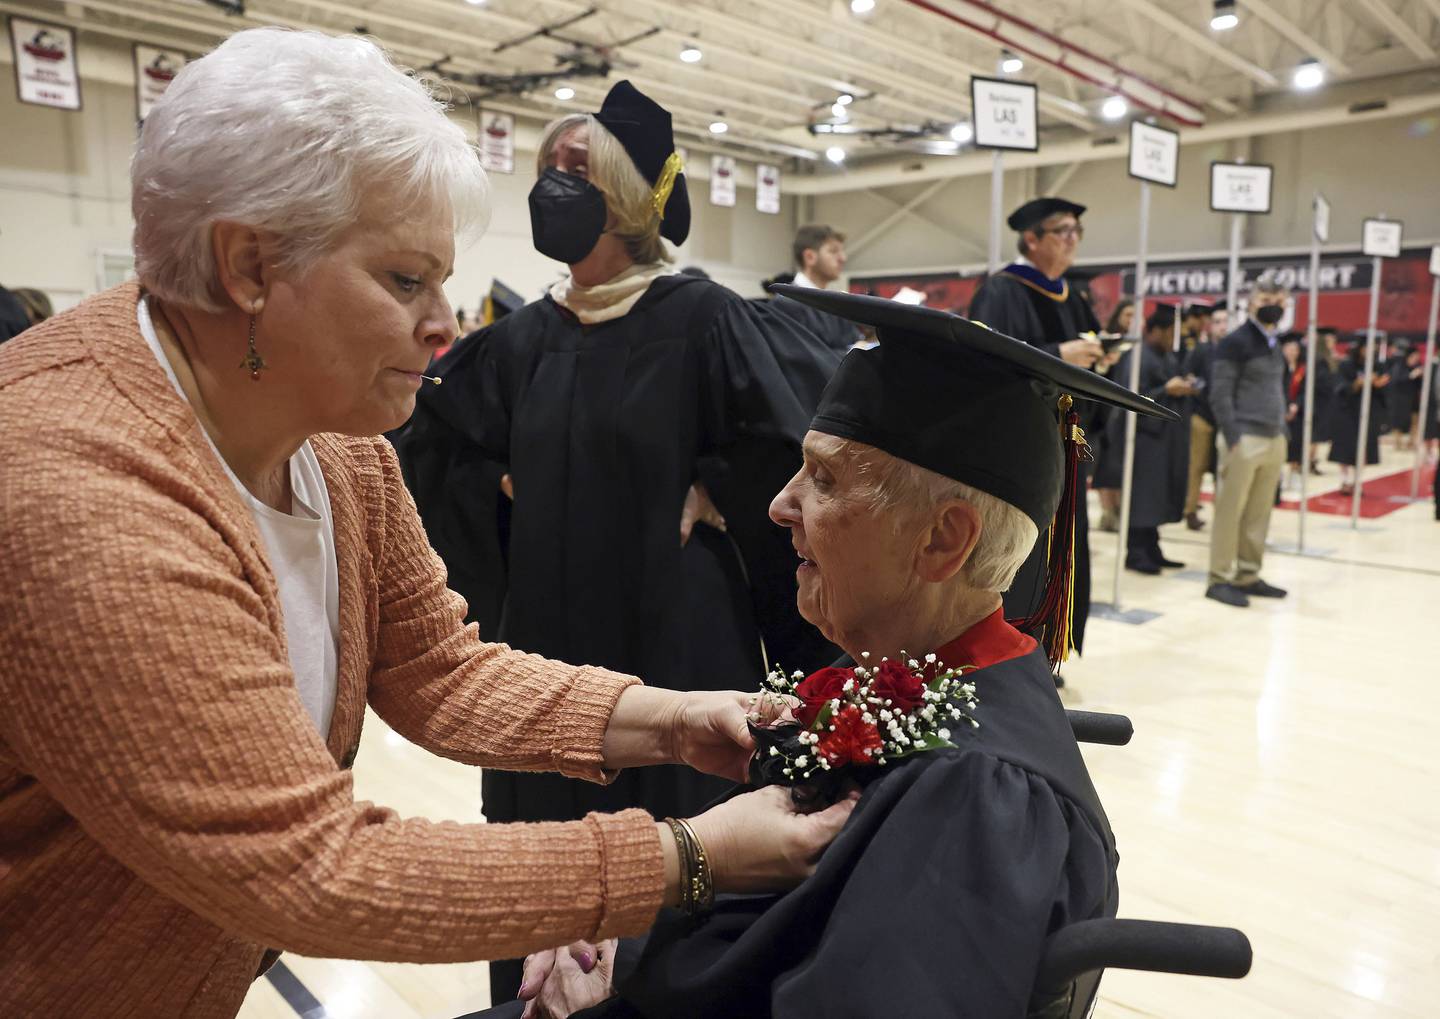 Joanne Wright adjusts flowers for her 90-year-old mother, Joyce DeFauw, before her commencement ceremony at Northern Illinois University on Dec. 11, 2022.